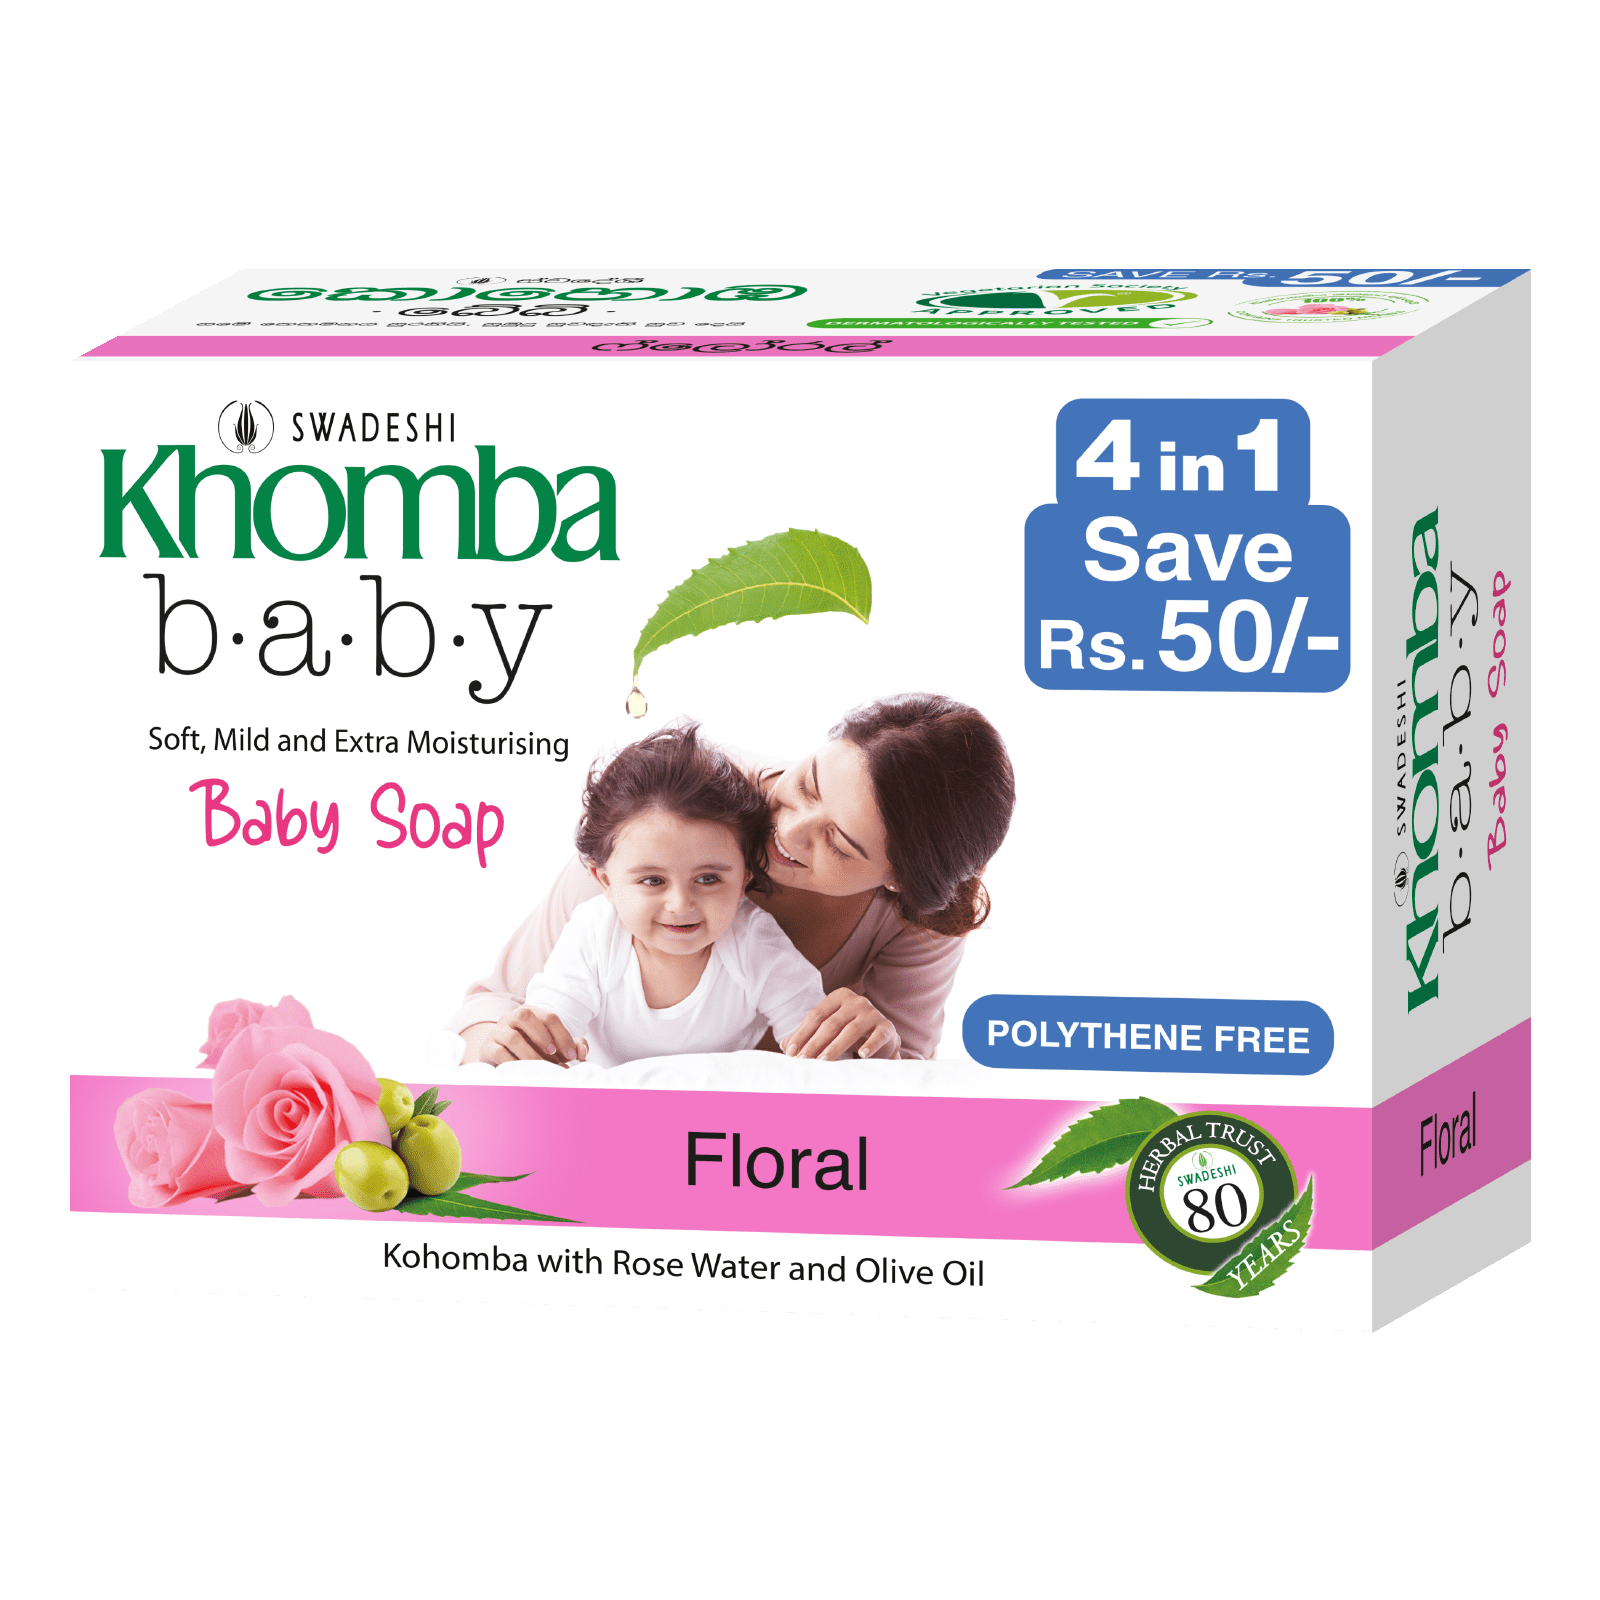 Khomba Baby Soap 4 in 1 Floral